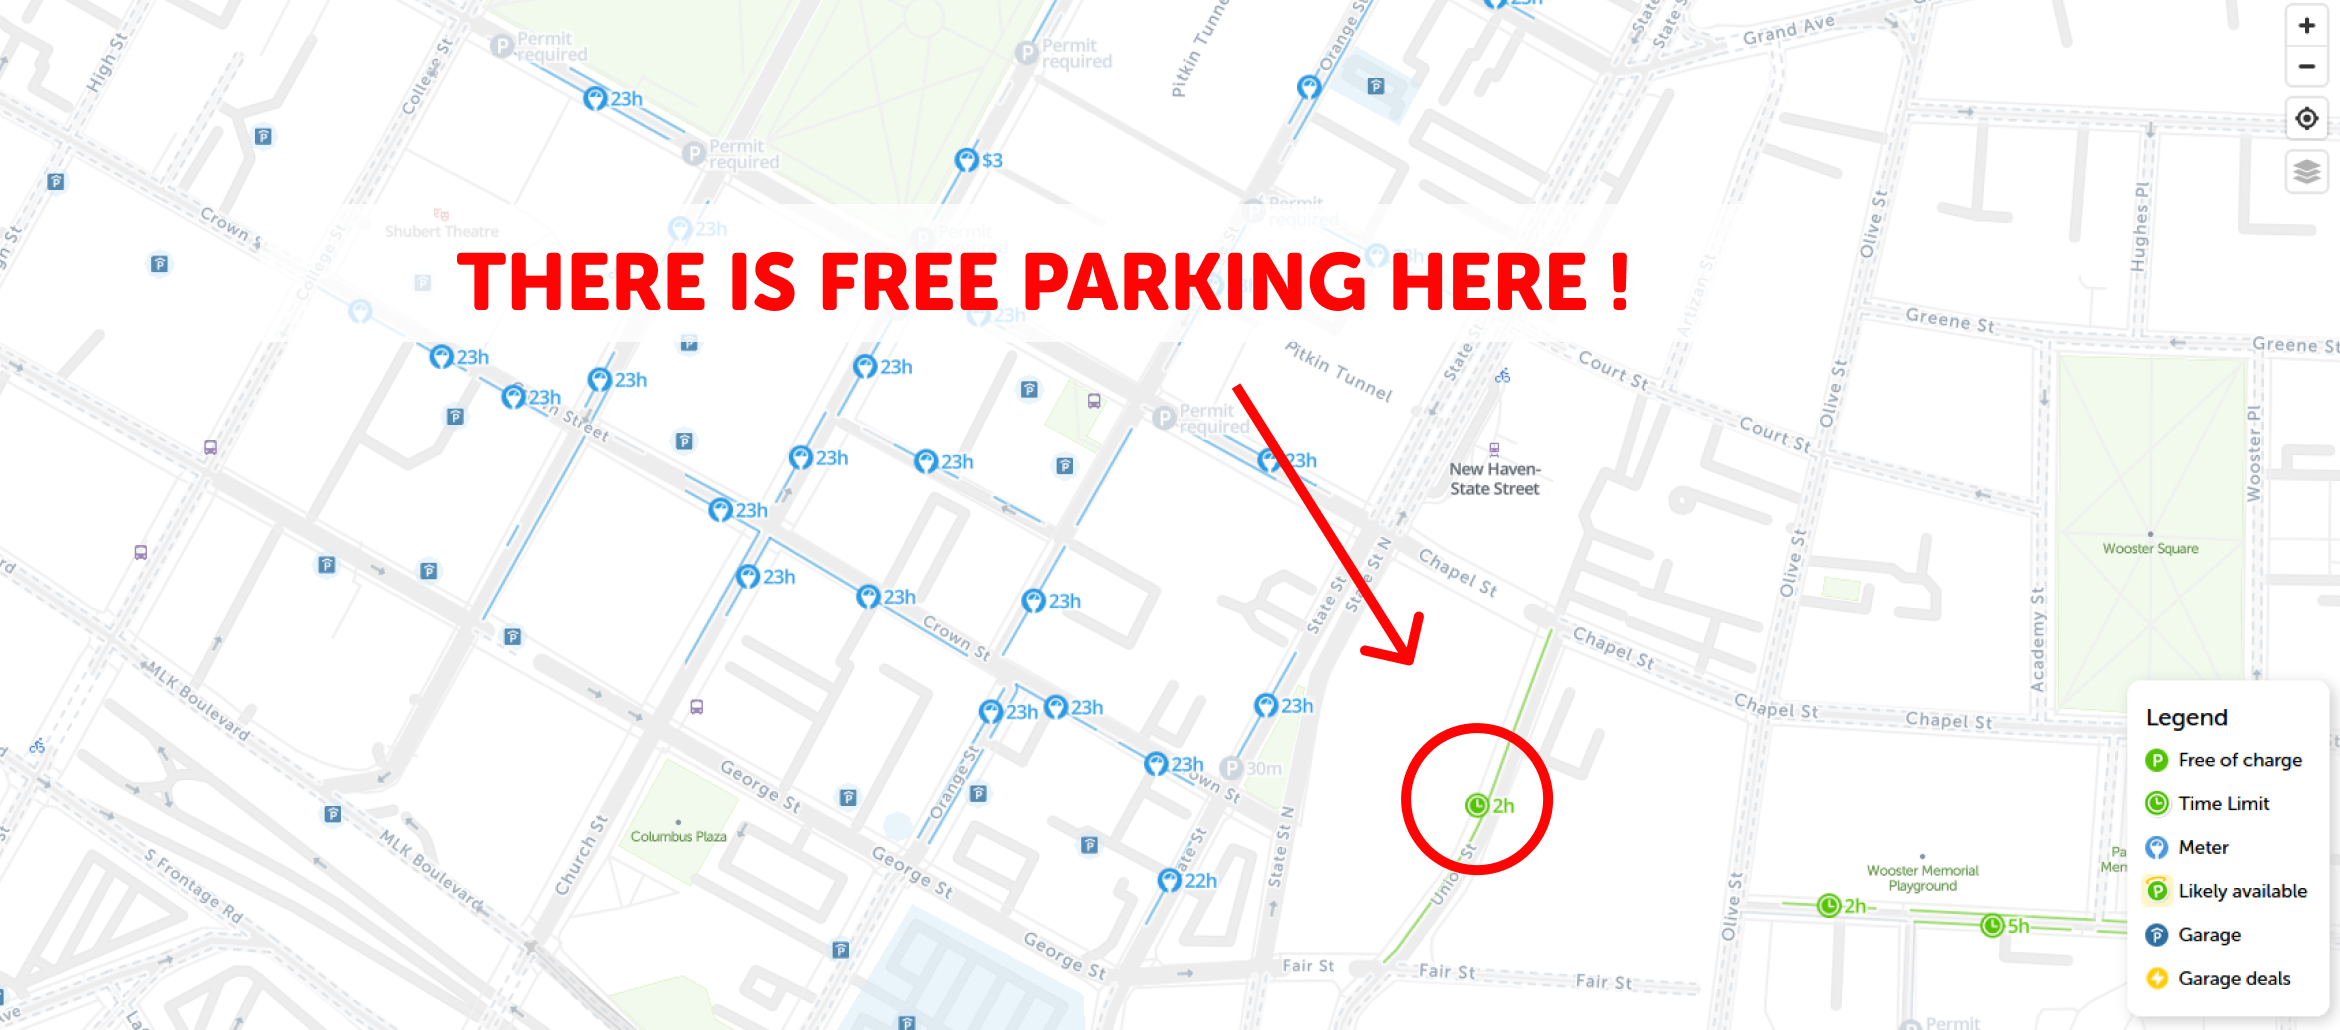 map of free parking in New Haven - SpotAngels